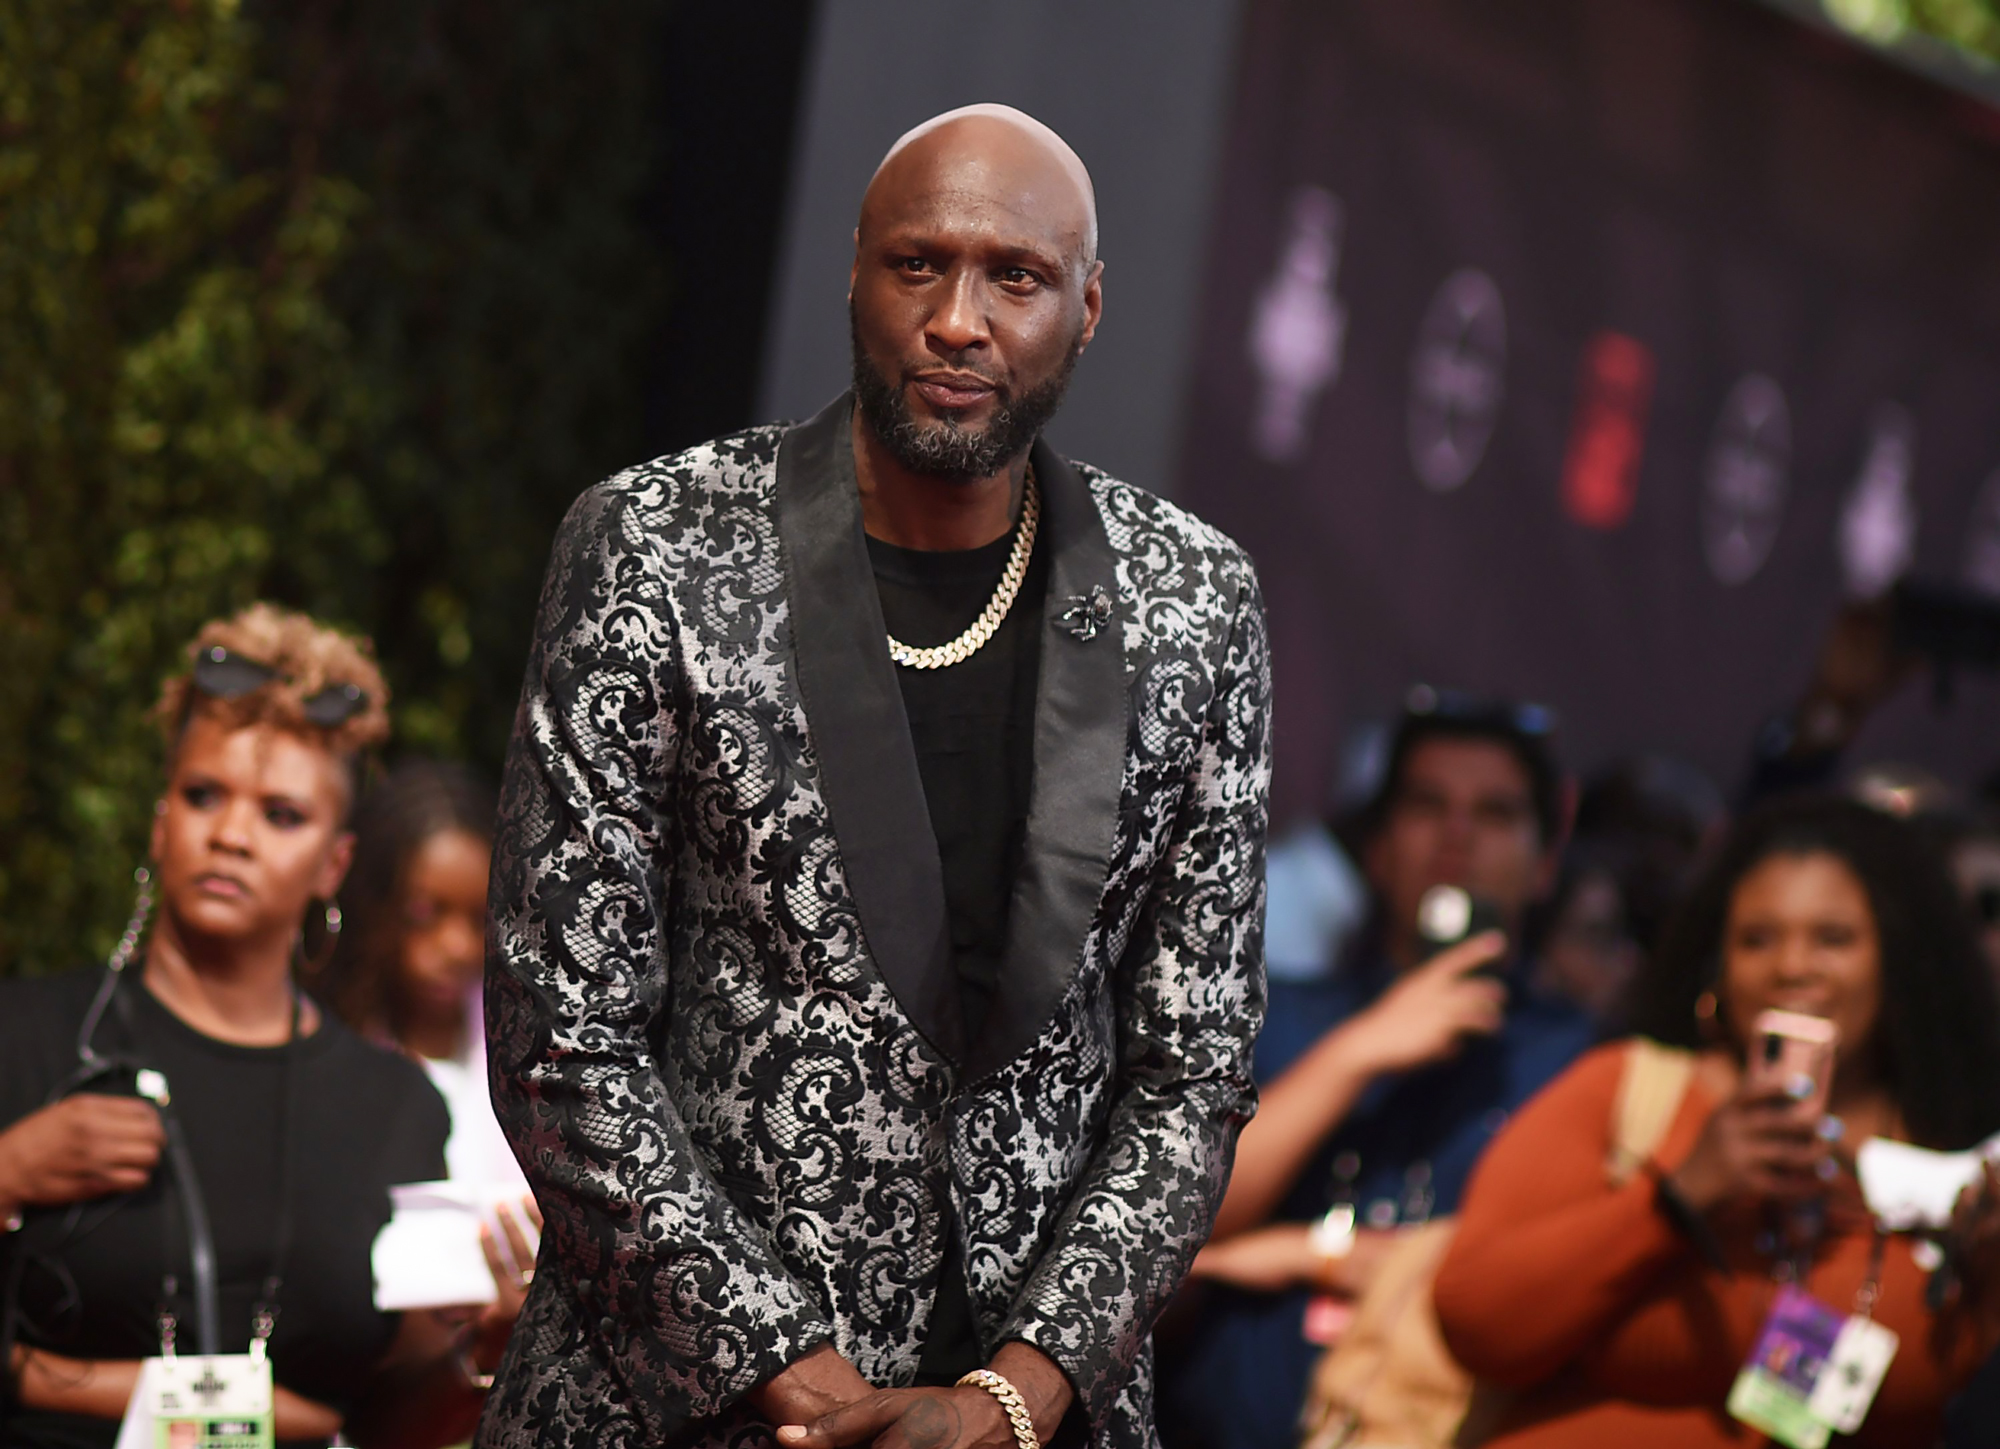 Former NBA star Lamar Odom signs 2-month contract with Spain's